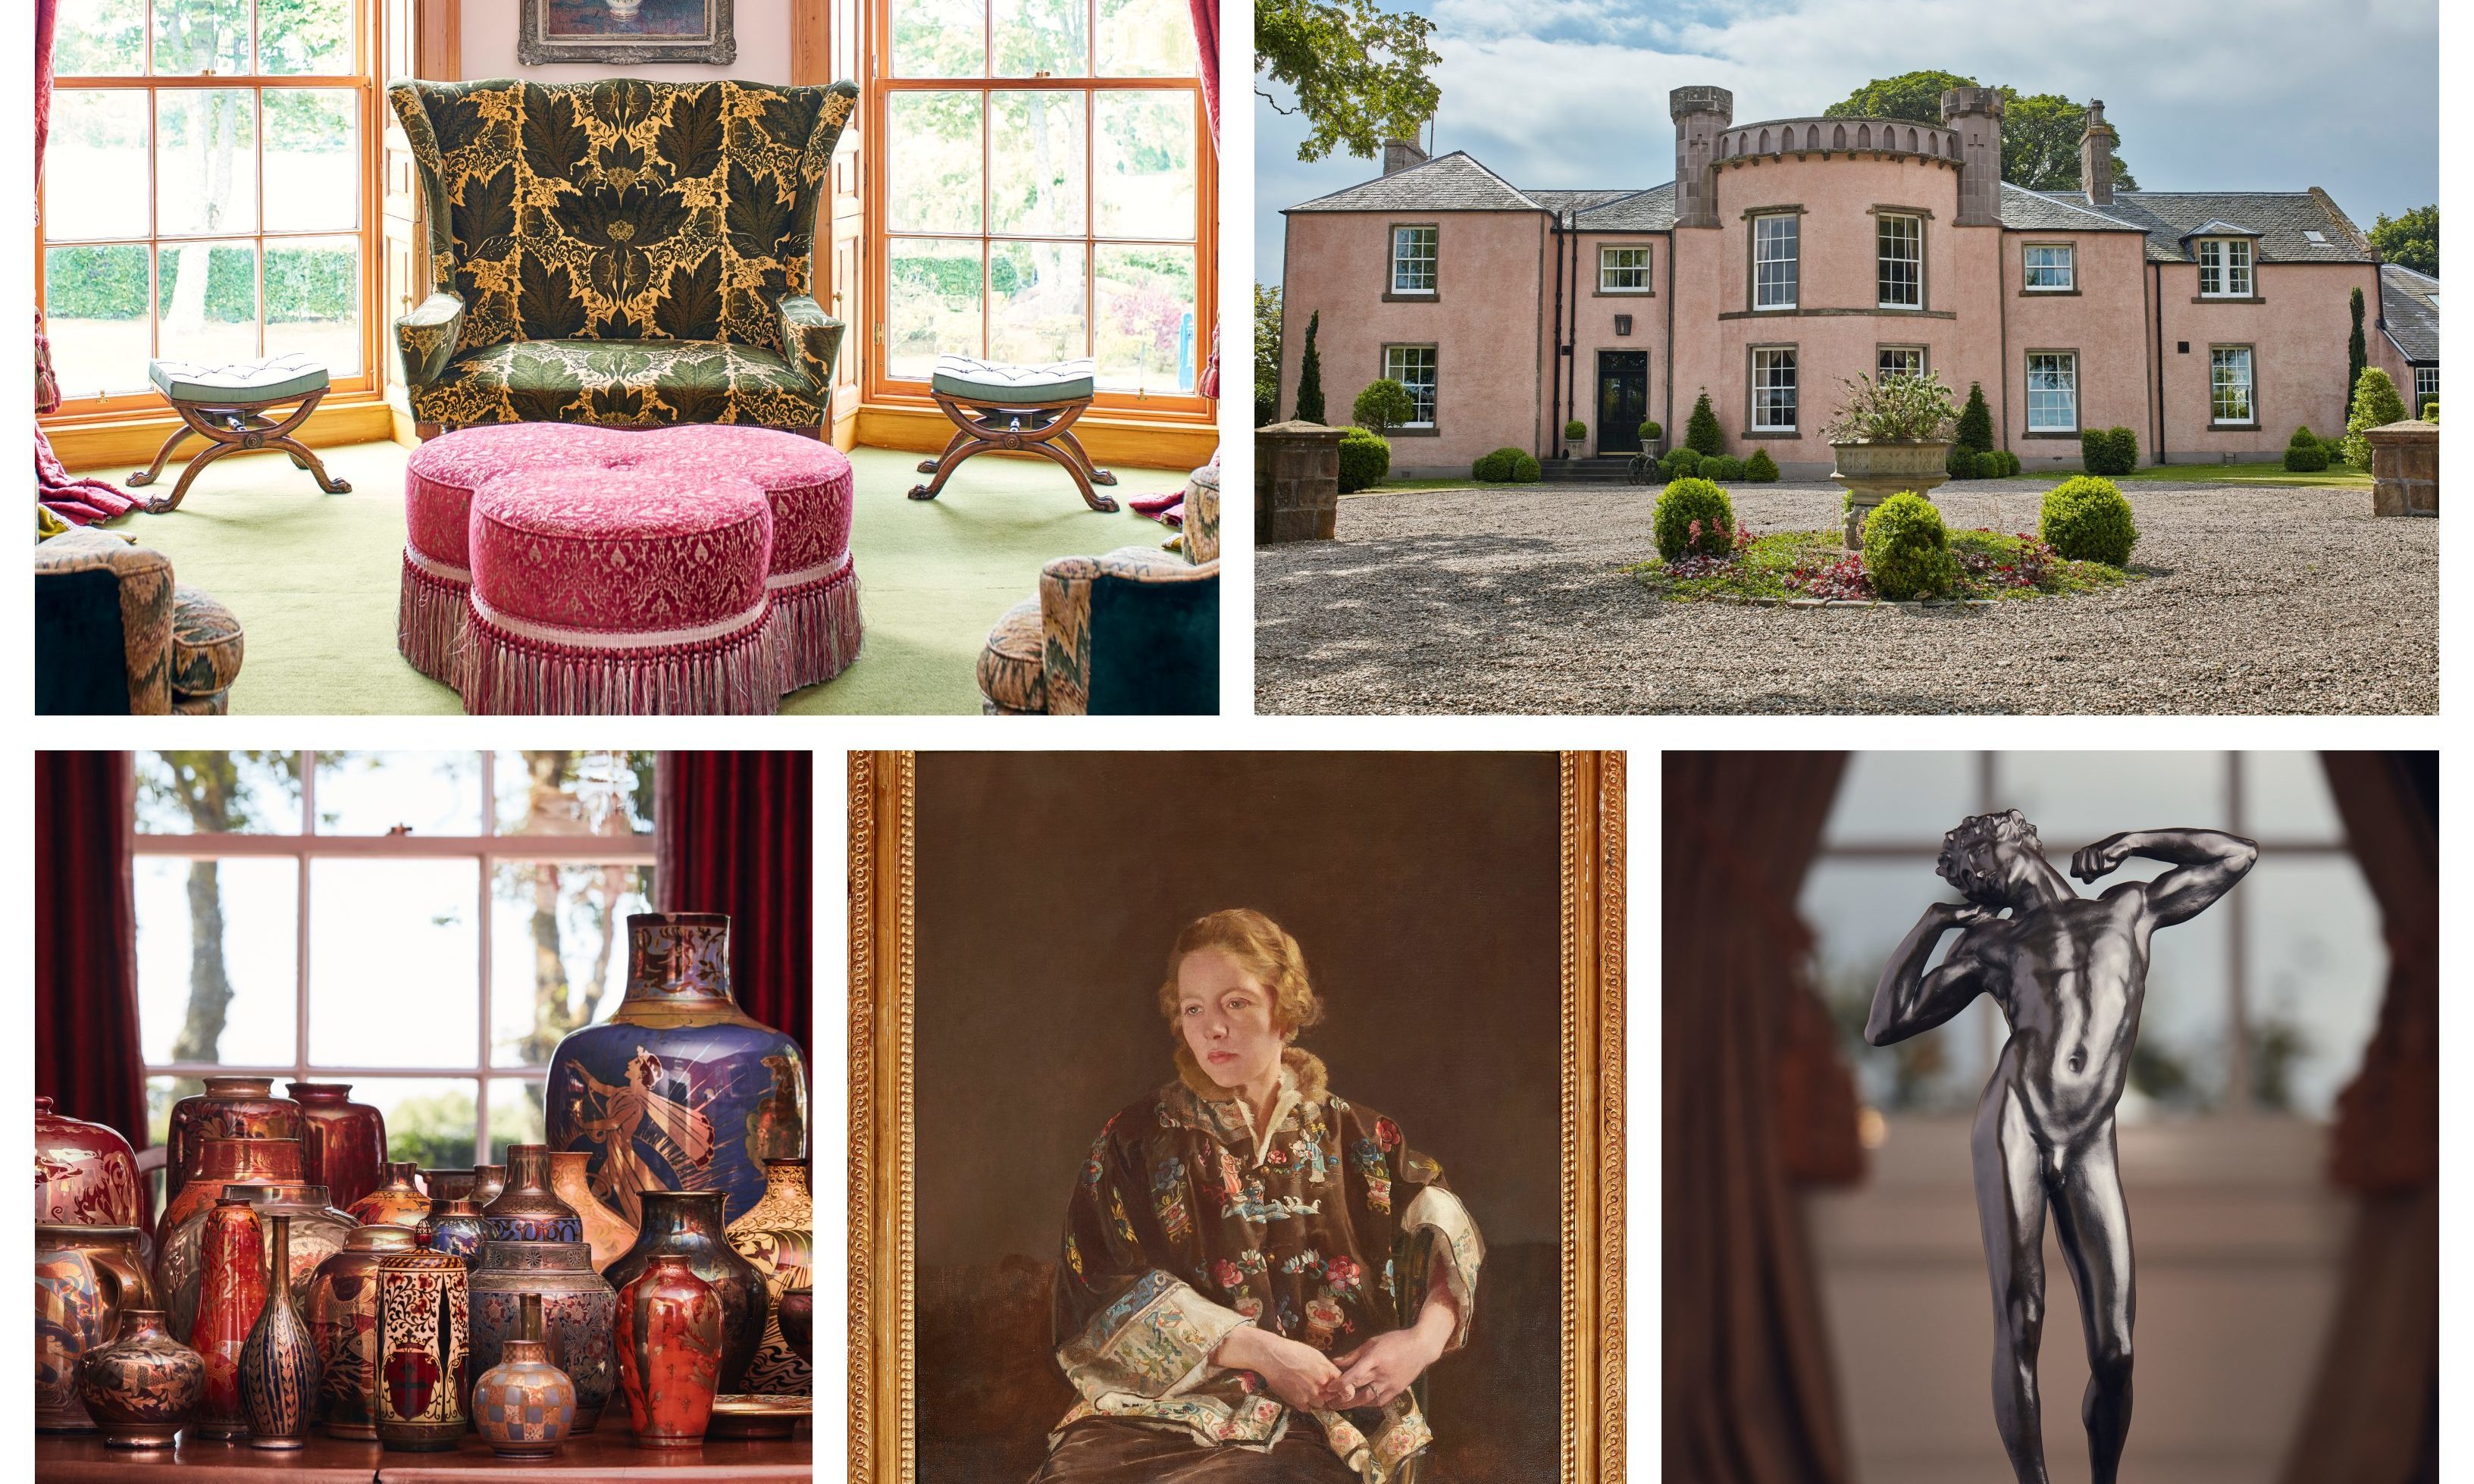 The contents of Kirkton House sold for £1million.